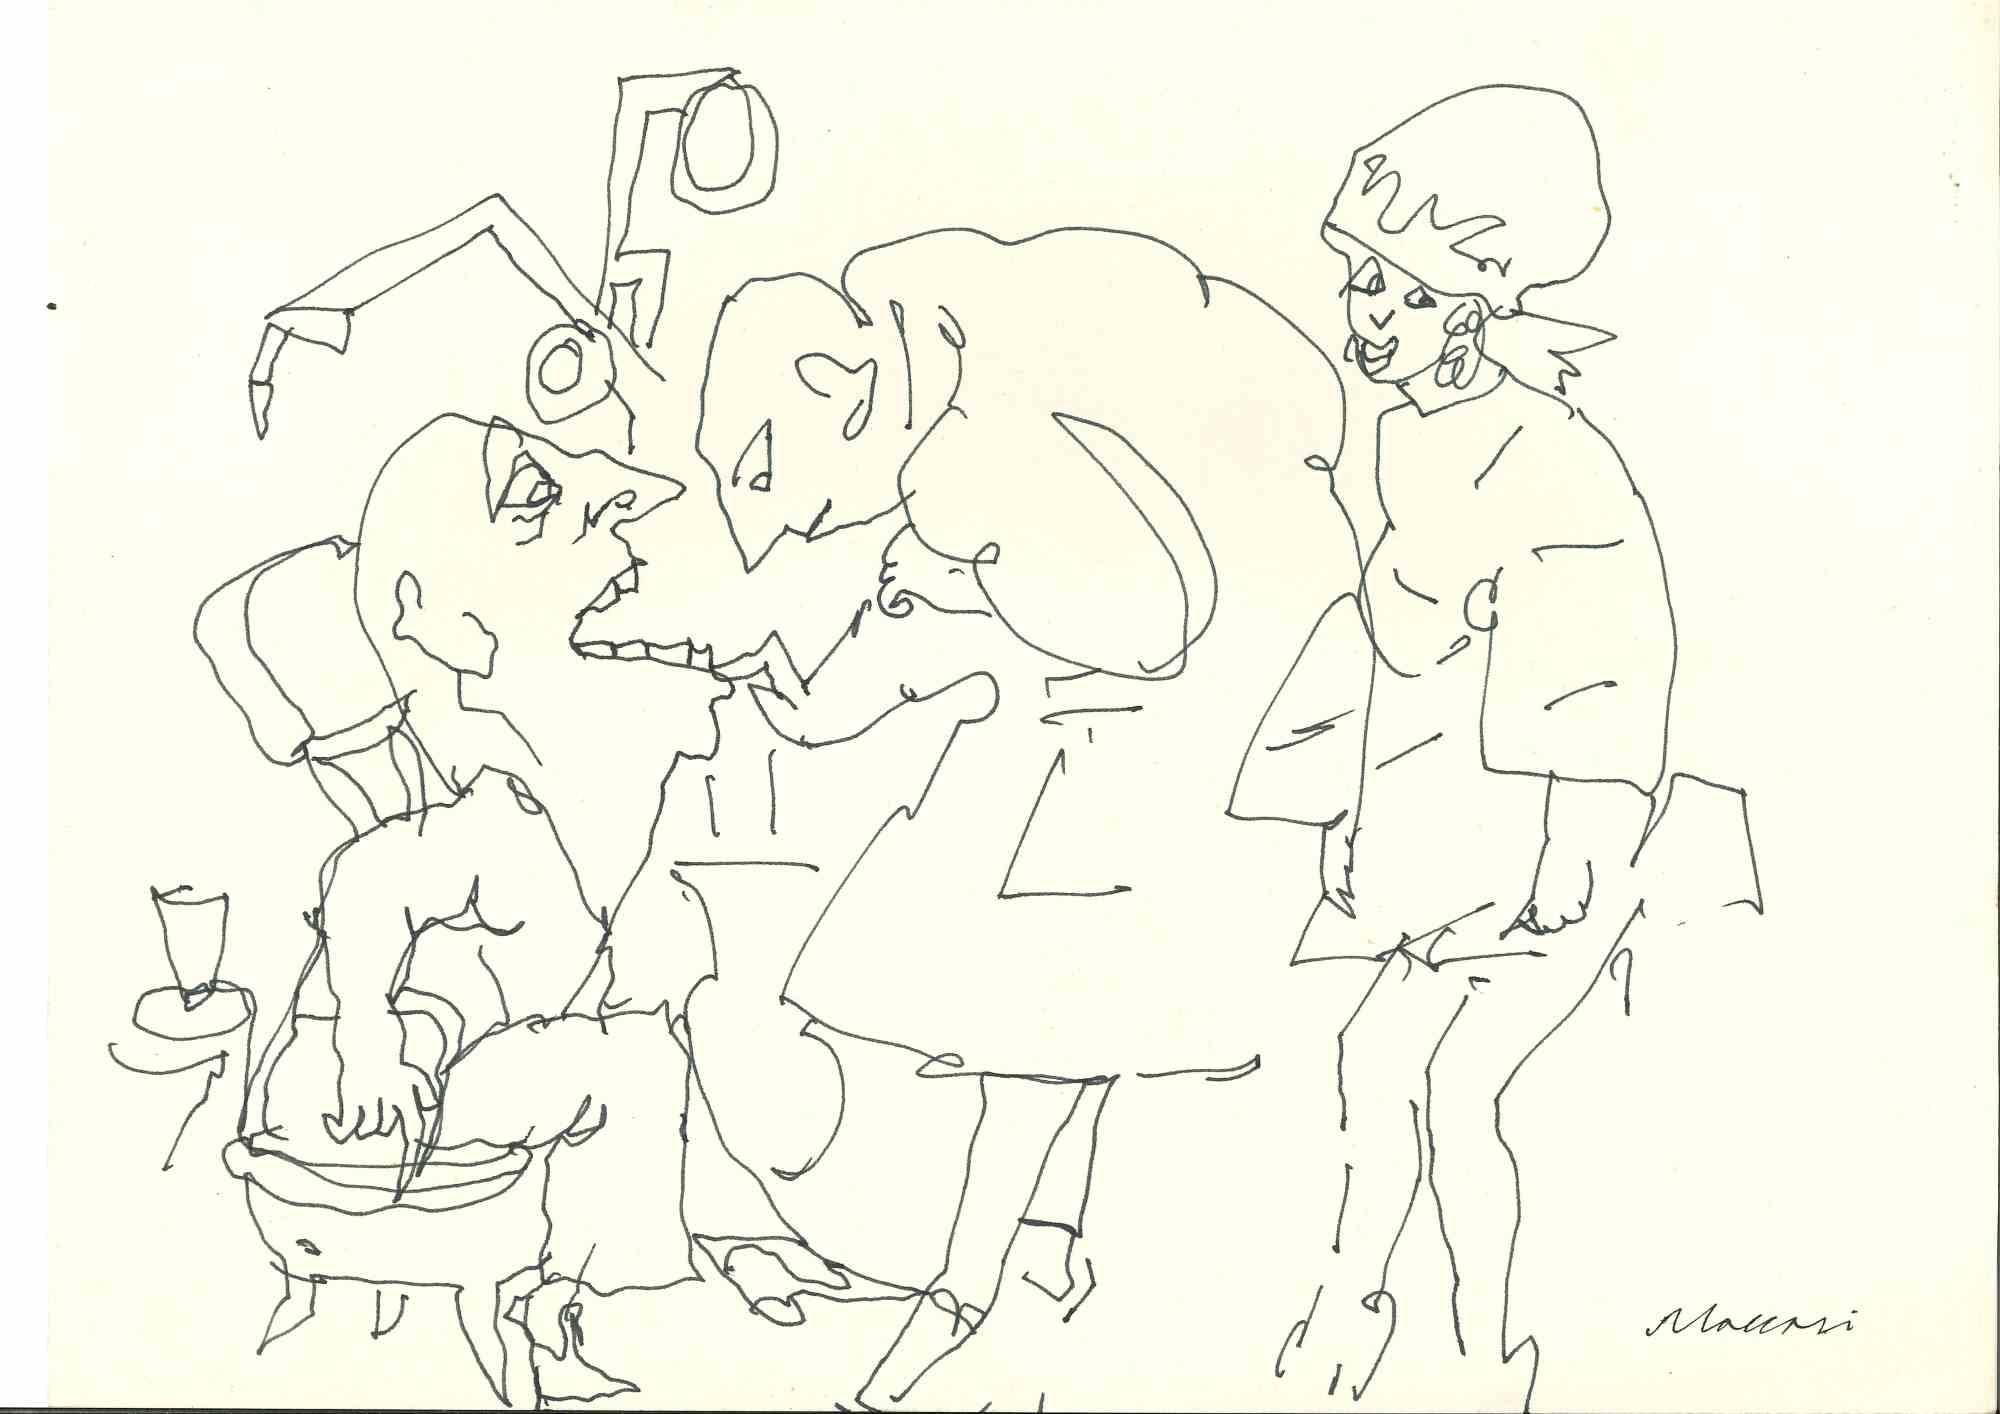 Dentistry is a pen Drawing realized by Mino Maccari  (1924-1989) in the 1950s.

Hand-signed on the lower margin.

Good condition.

Mino Maccari (Siena, 1924-Rome, June 16, 1989) was an Italian writer, painter, engraver and journalist, winner of the